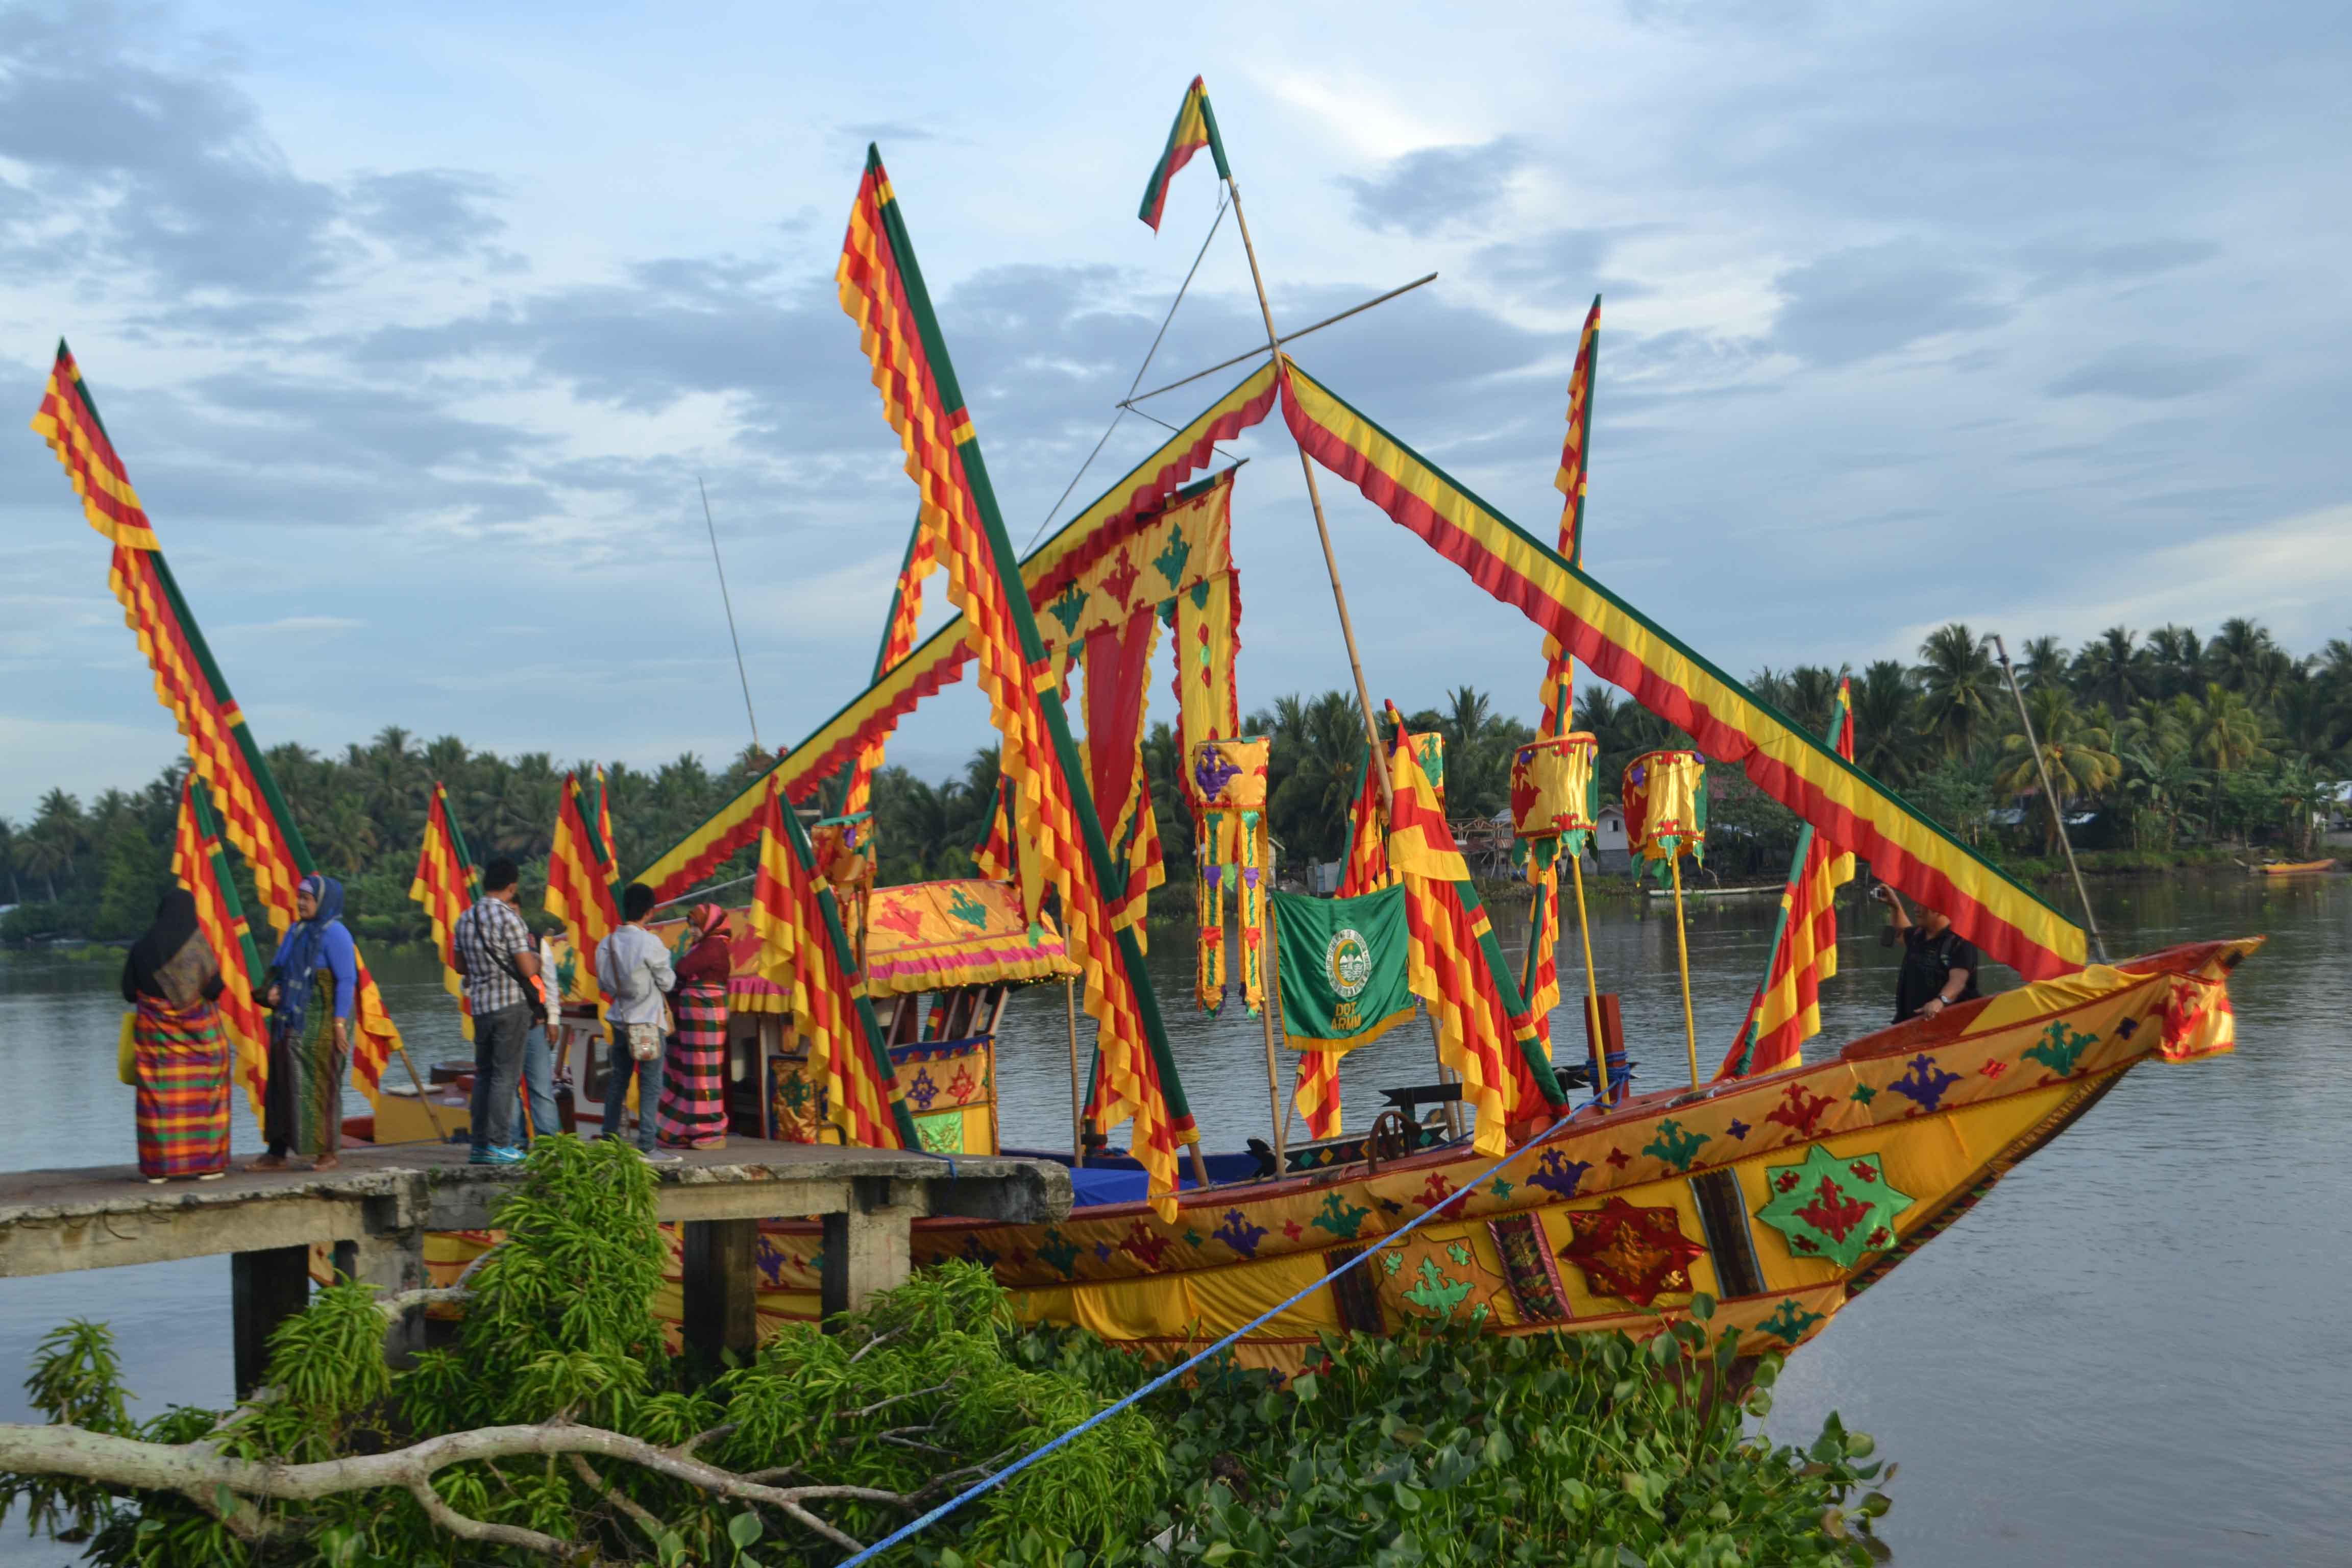 <ul><li><p>Region 12 (Sarangani)</p></li><li><p>Brightly colored boats used by Muslim royals and high- ranking people in Mindanao during the pre-colonial and Spanish periods, and now showcased in the Pakaradyan Festival</p></li></ul>